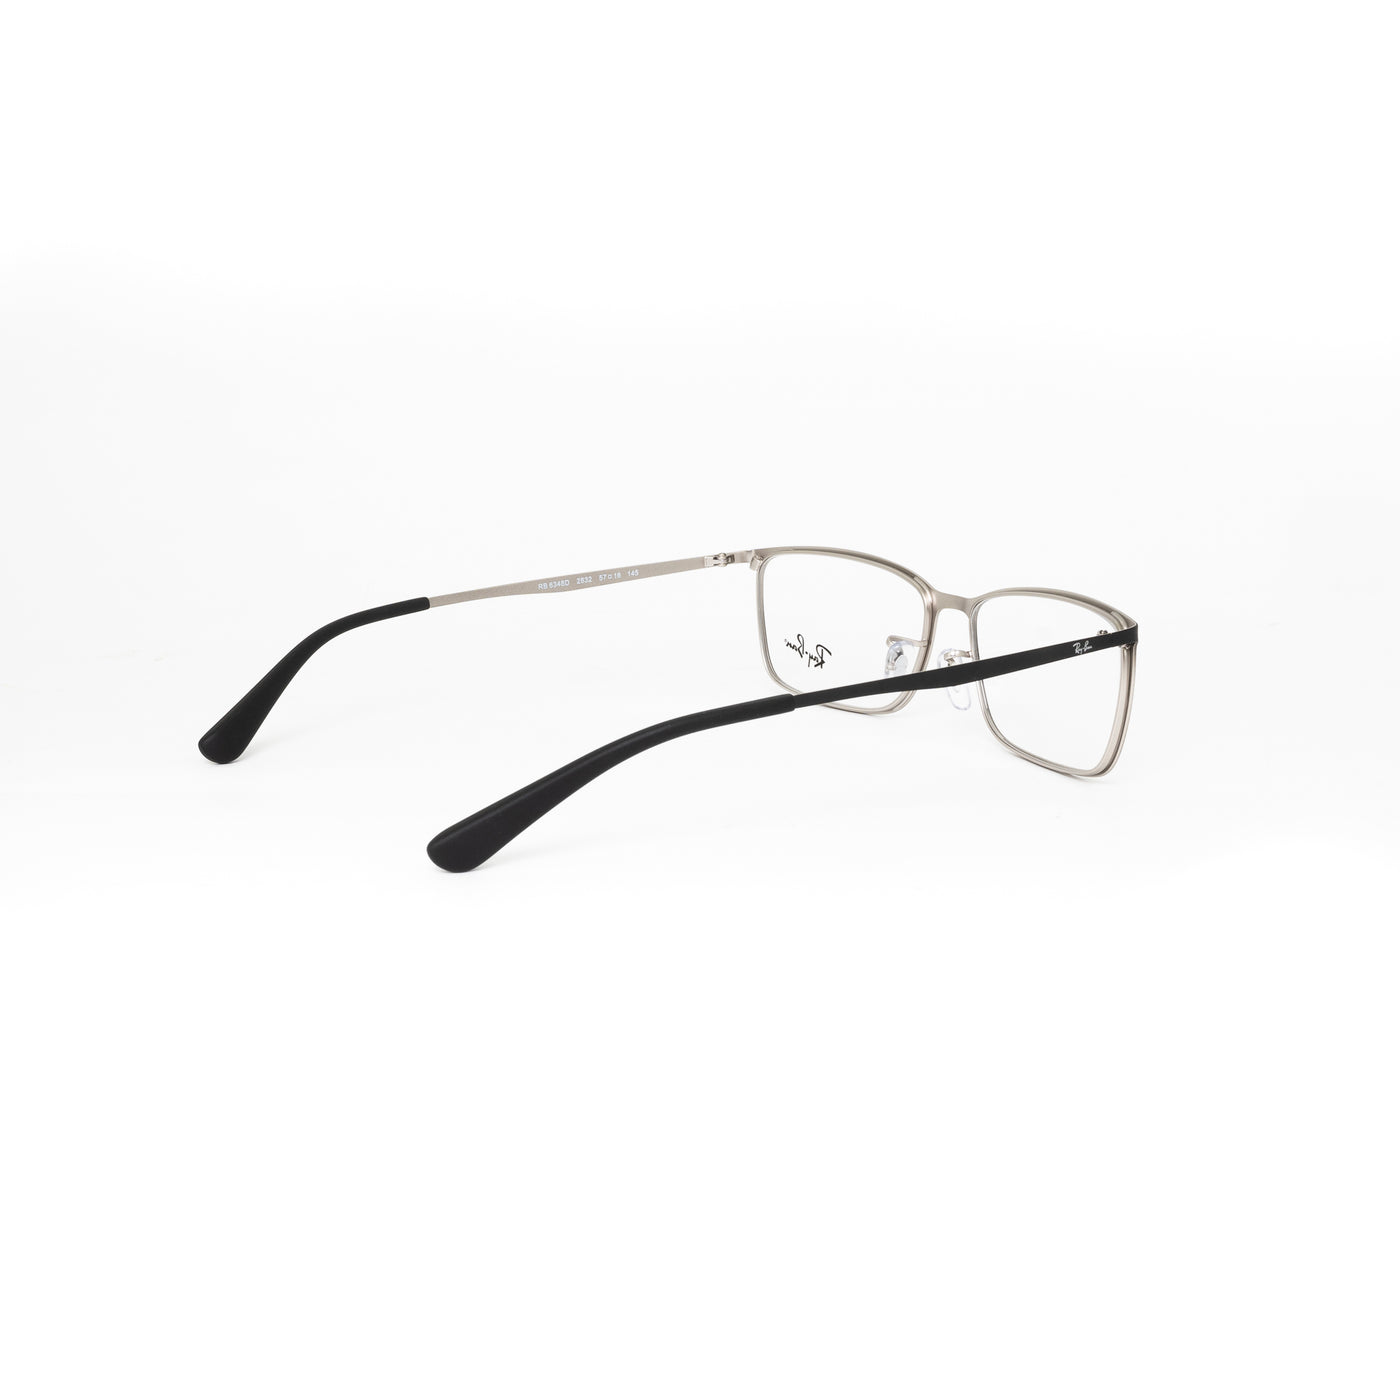 Ray-Ban RB6348D/2832_57 | Eyeglasses - Vision Express Optical Philippines